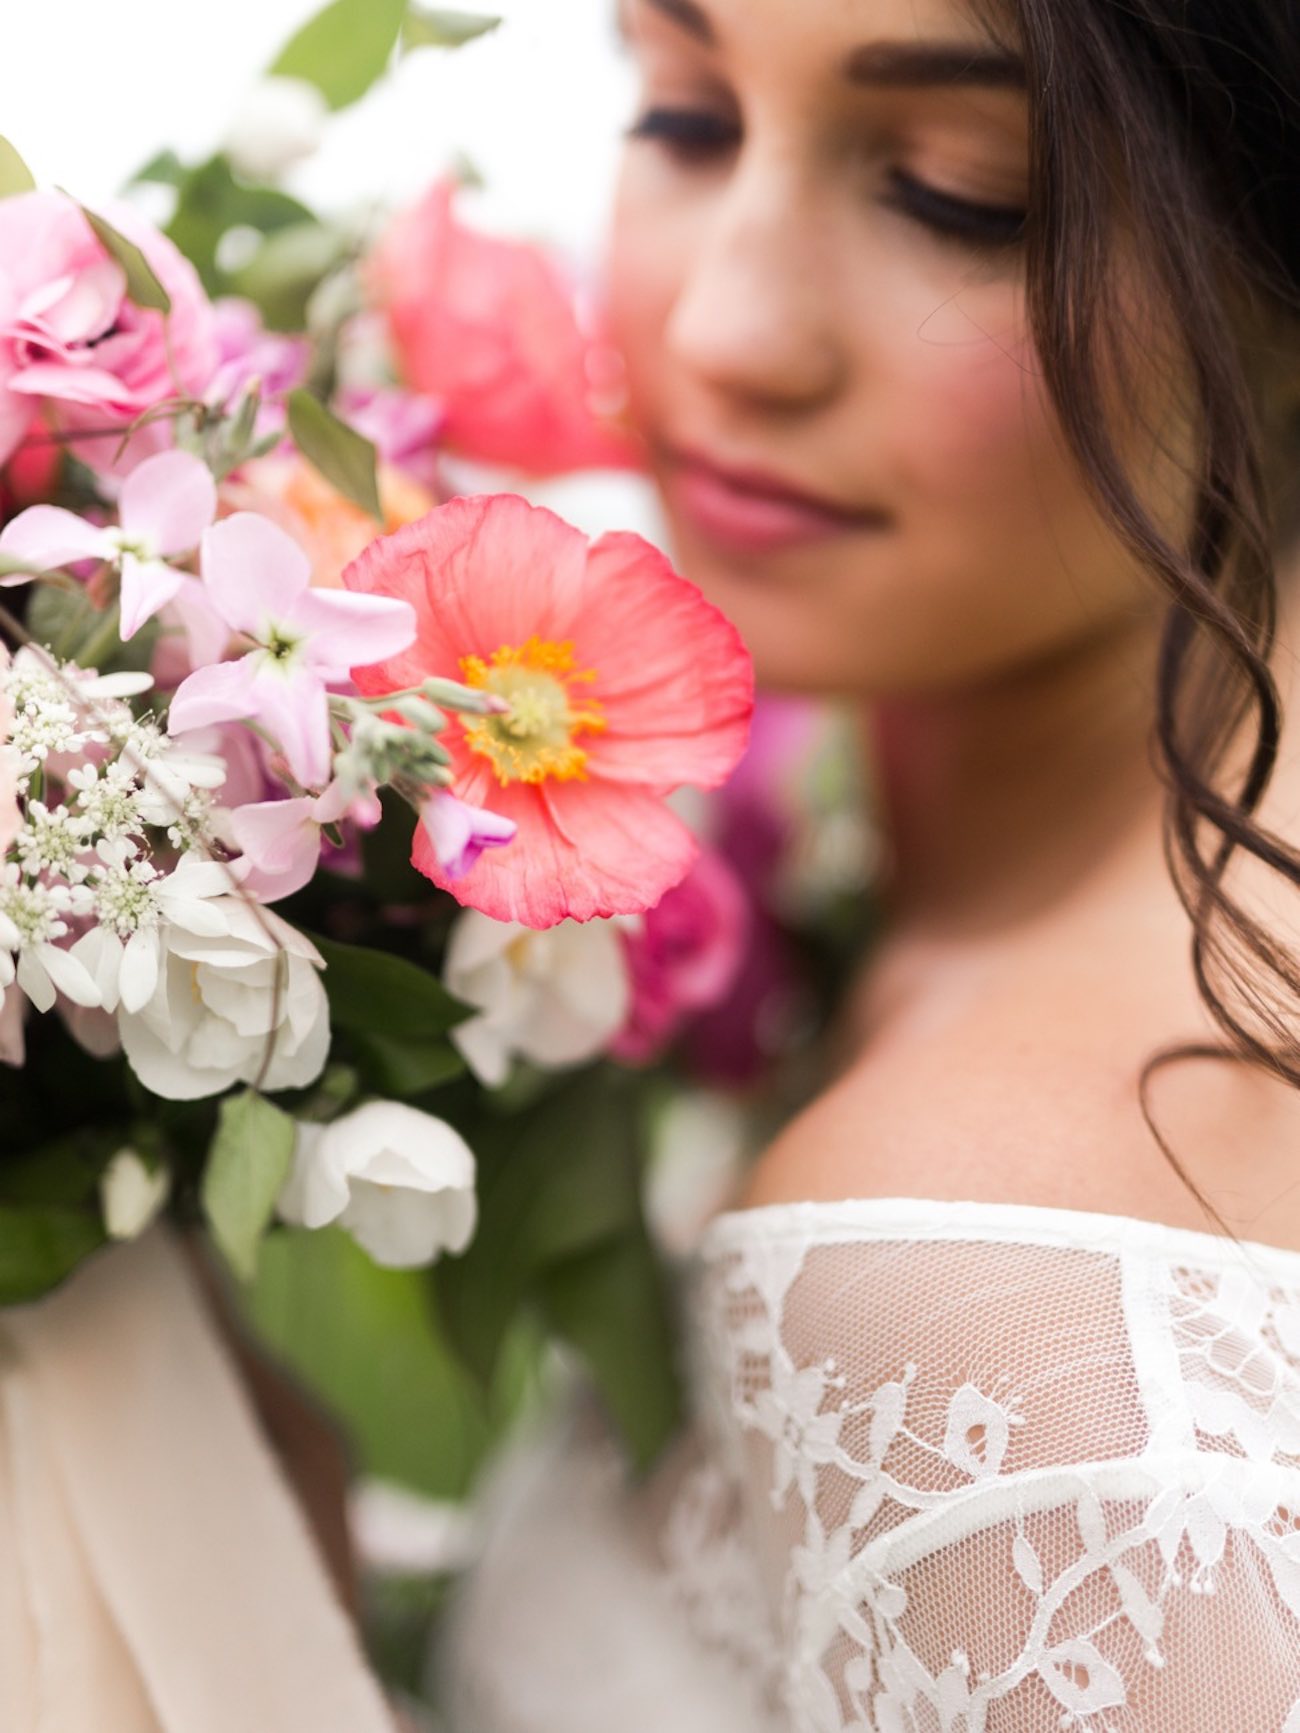 Ideas for the Romantic, Thoughtful, Environmentally-Friendly Bride ...